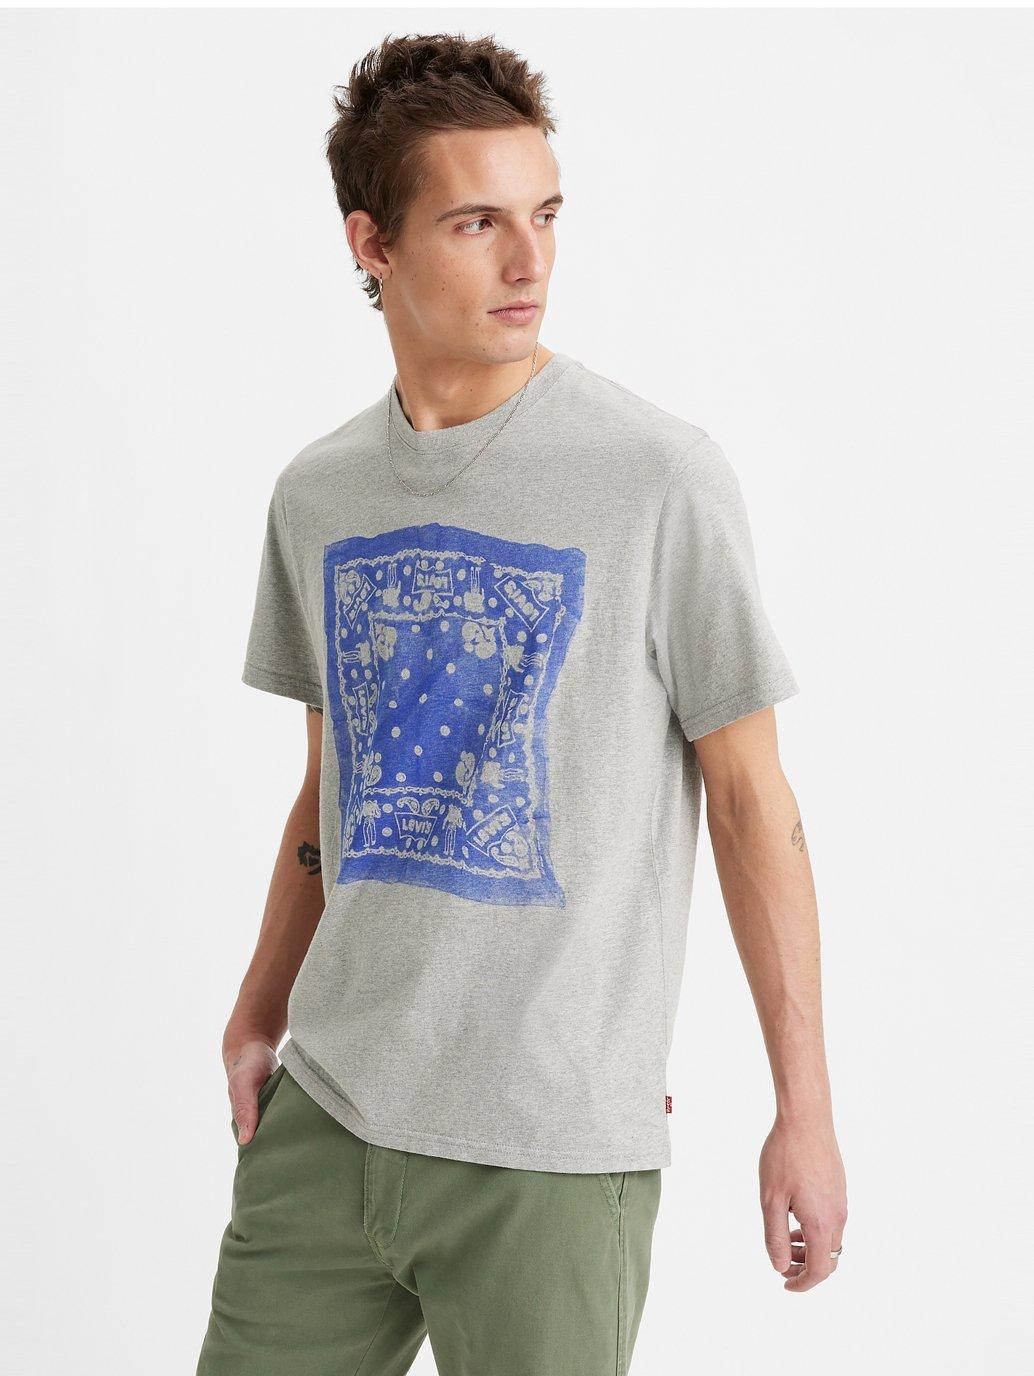 Buy Levi's® Men's Relaxed Fit Short Sleeve T-Shirt | Levi’s Official ...